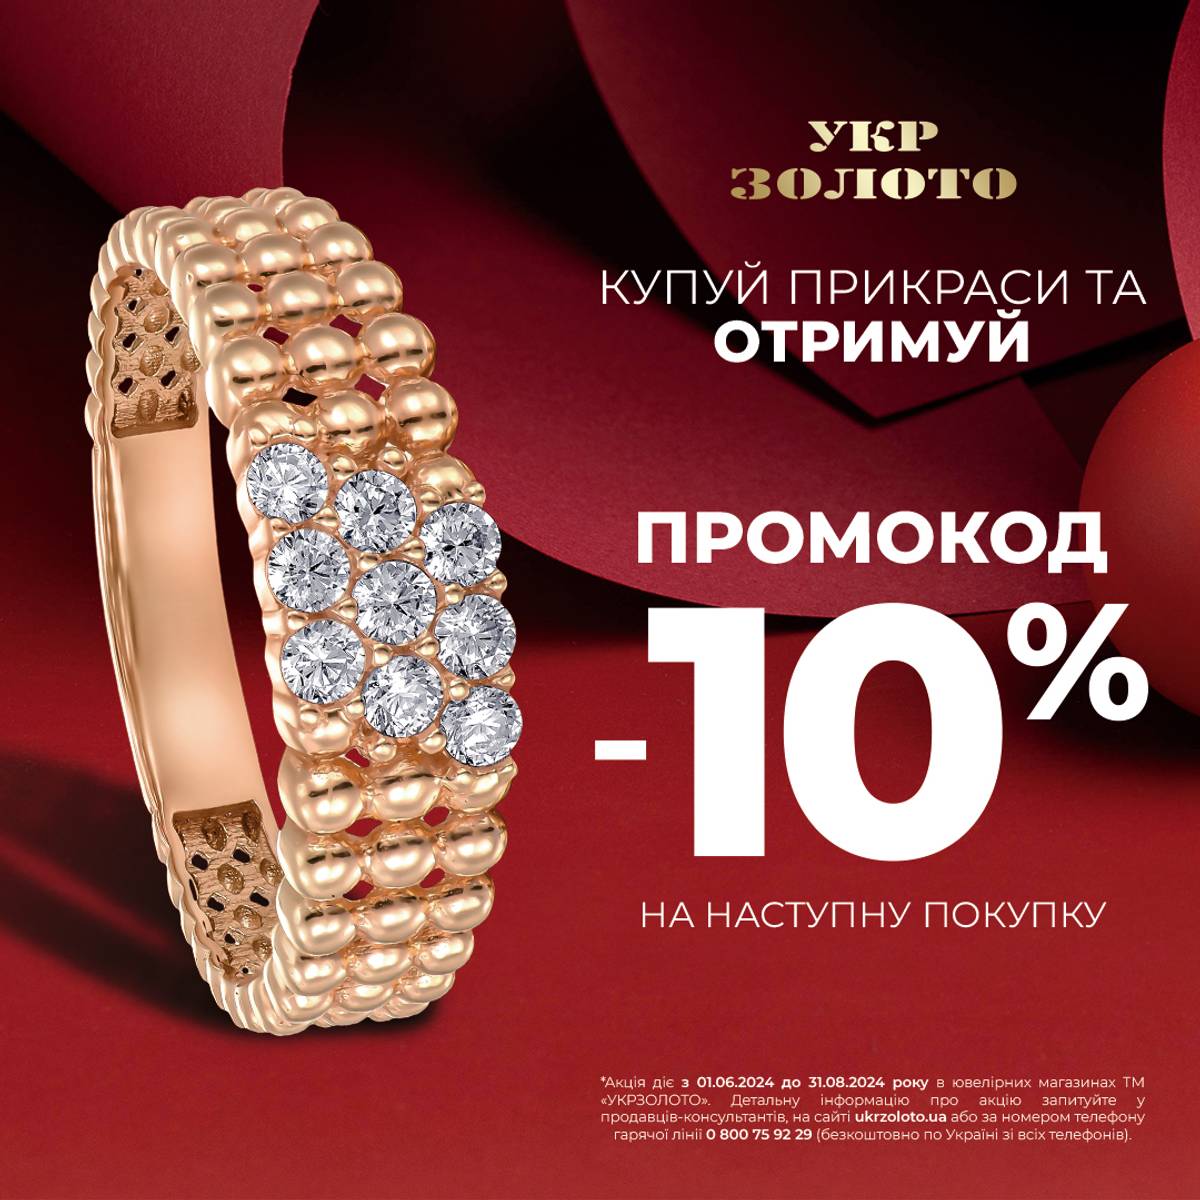 Sunny offer from "Ukrzoloto"!